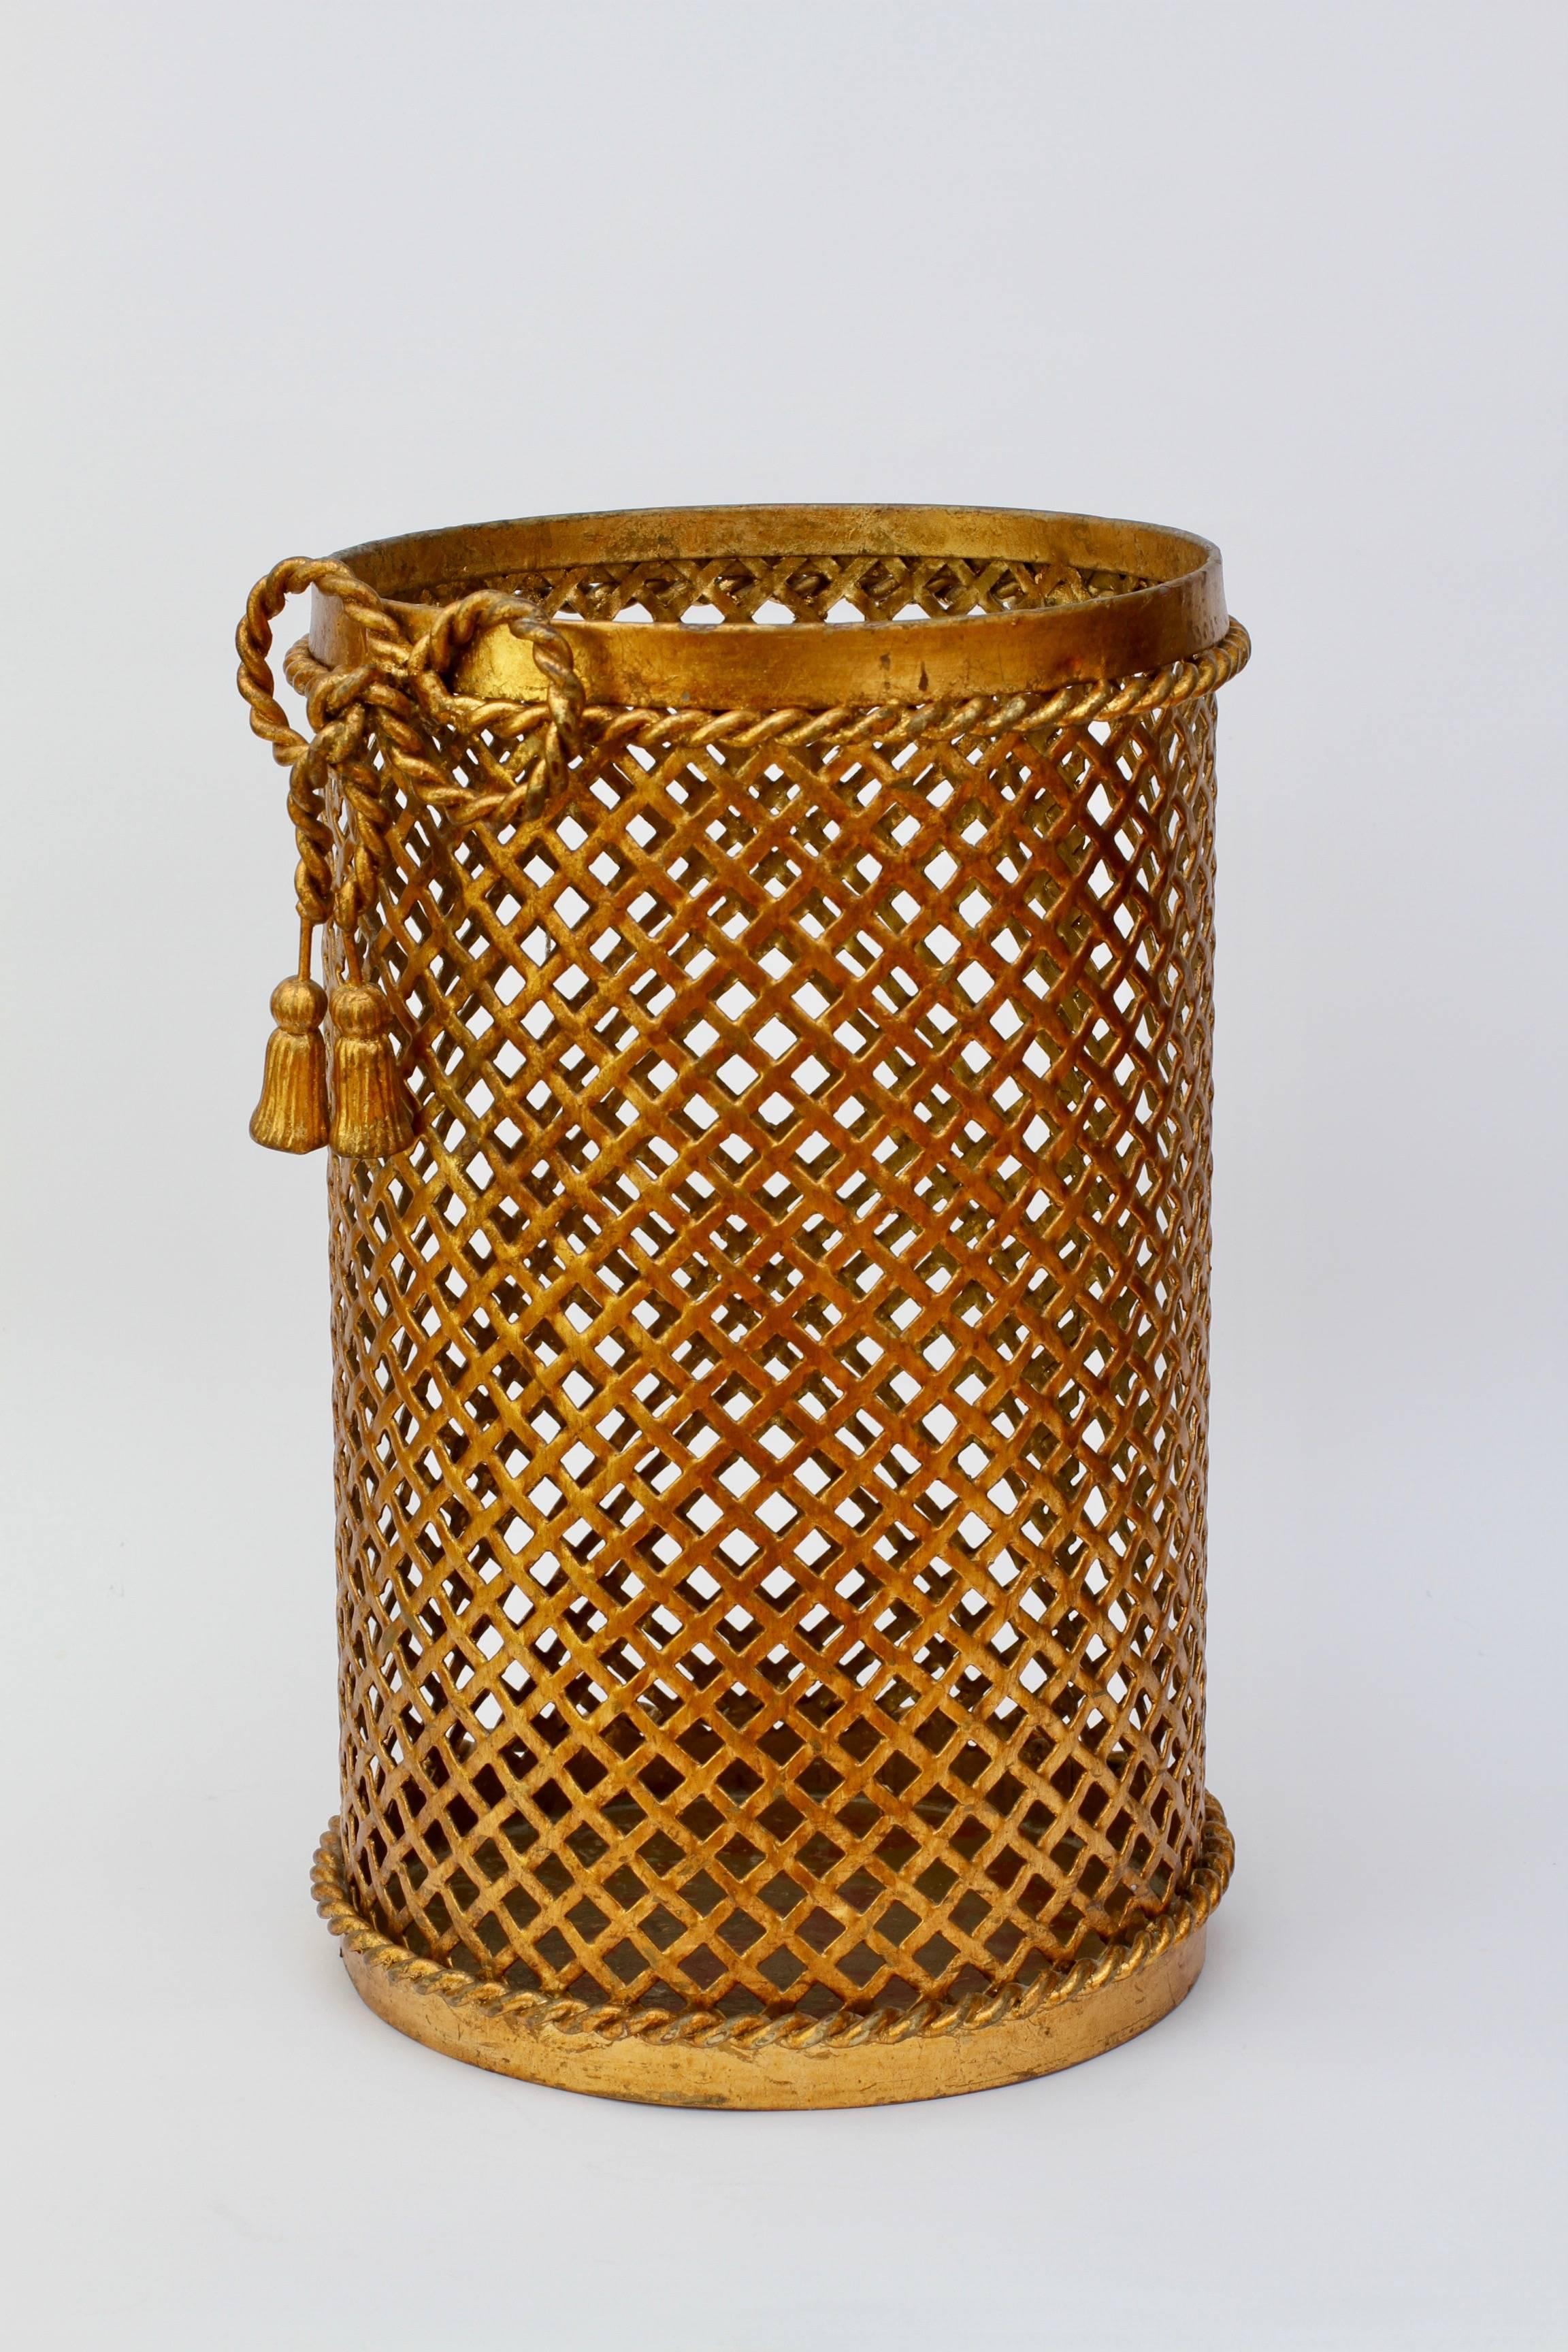 Stunning and vintage gold / gilt / gilded Hollywood Regency style trash can / bin / waste paper basket made in Italy, circa 1950. The perforated lattice patterned metalwork with bent rope and tassel details finishes the piece perfectly. Quite rare